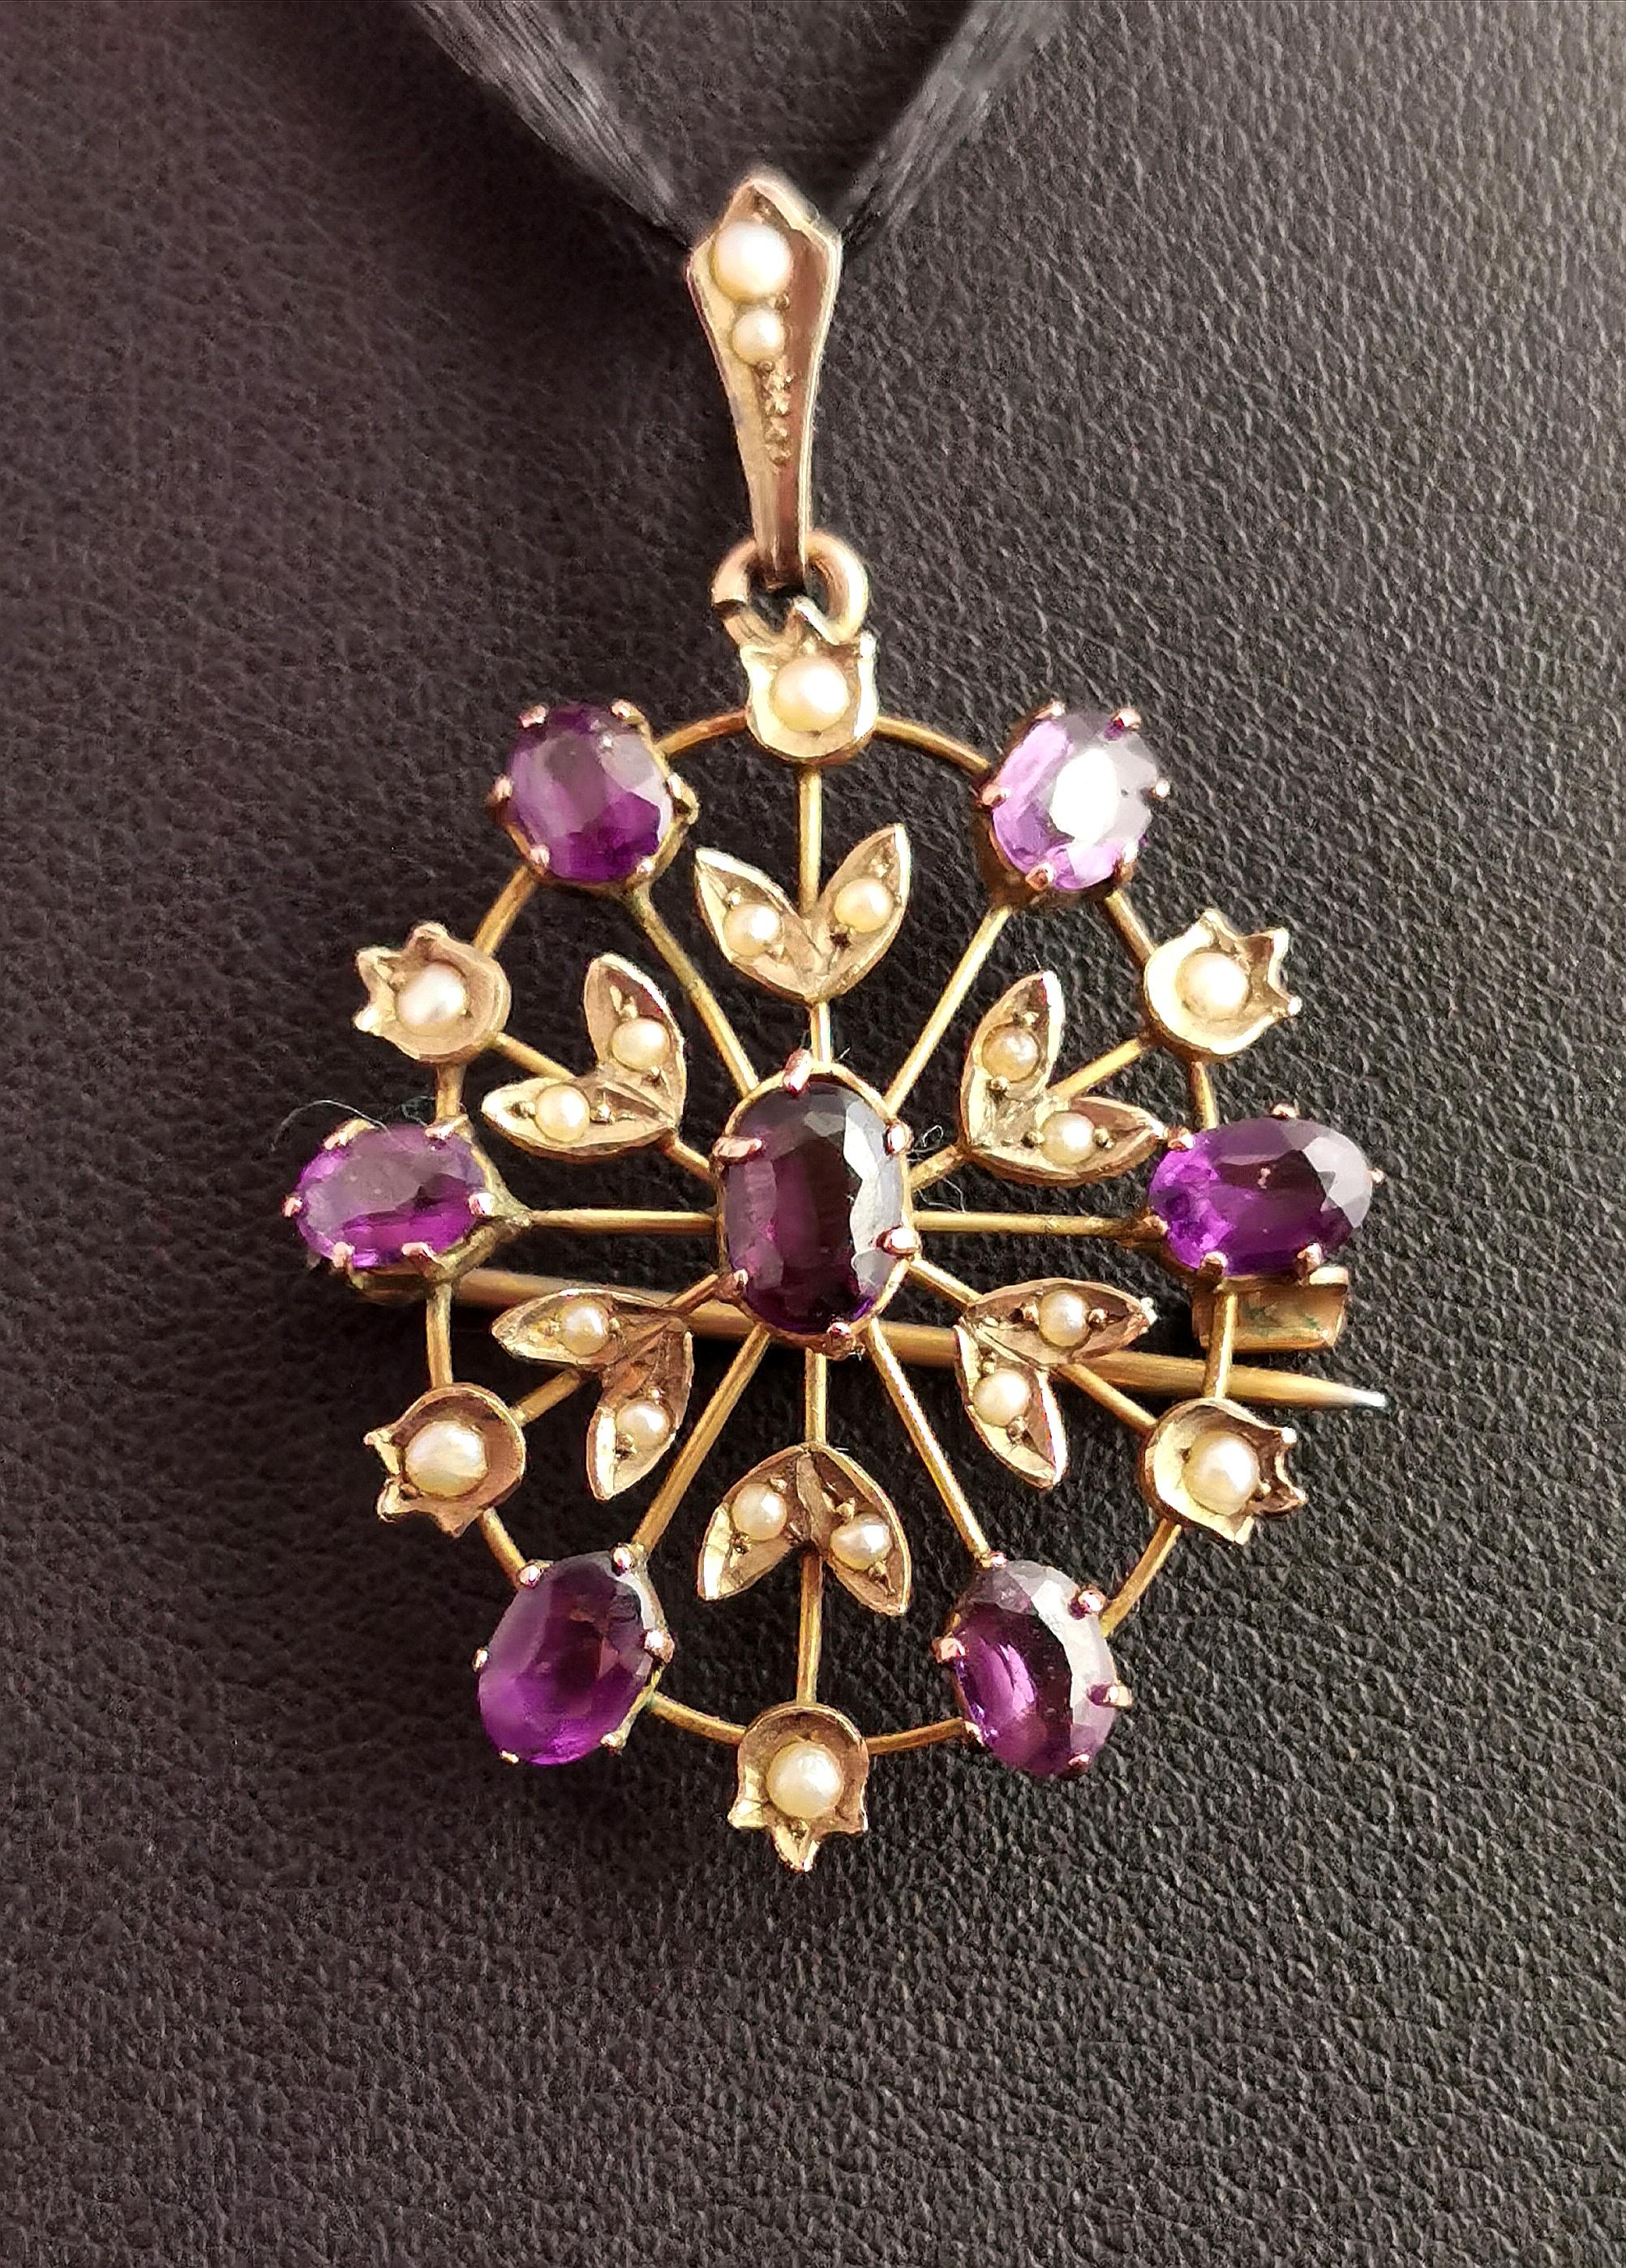 A beautiful antique, Art Nouveau era brooch pendant.

This pretty and universal jewellery piece can be worn as either a pendant or a brooch.

It has an oval openwork design with tiny seed pearl set flowers set around the oval, the flower head and